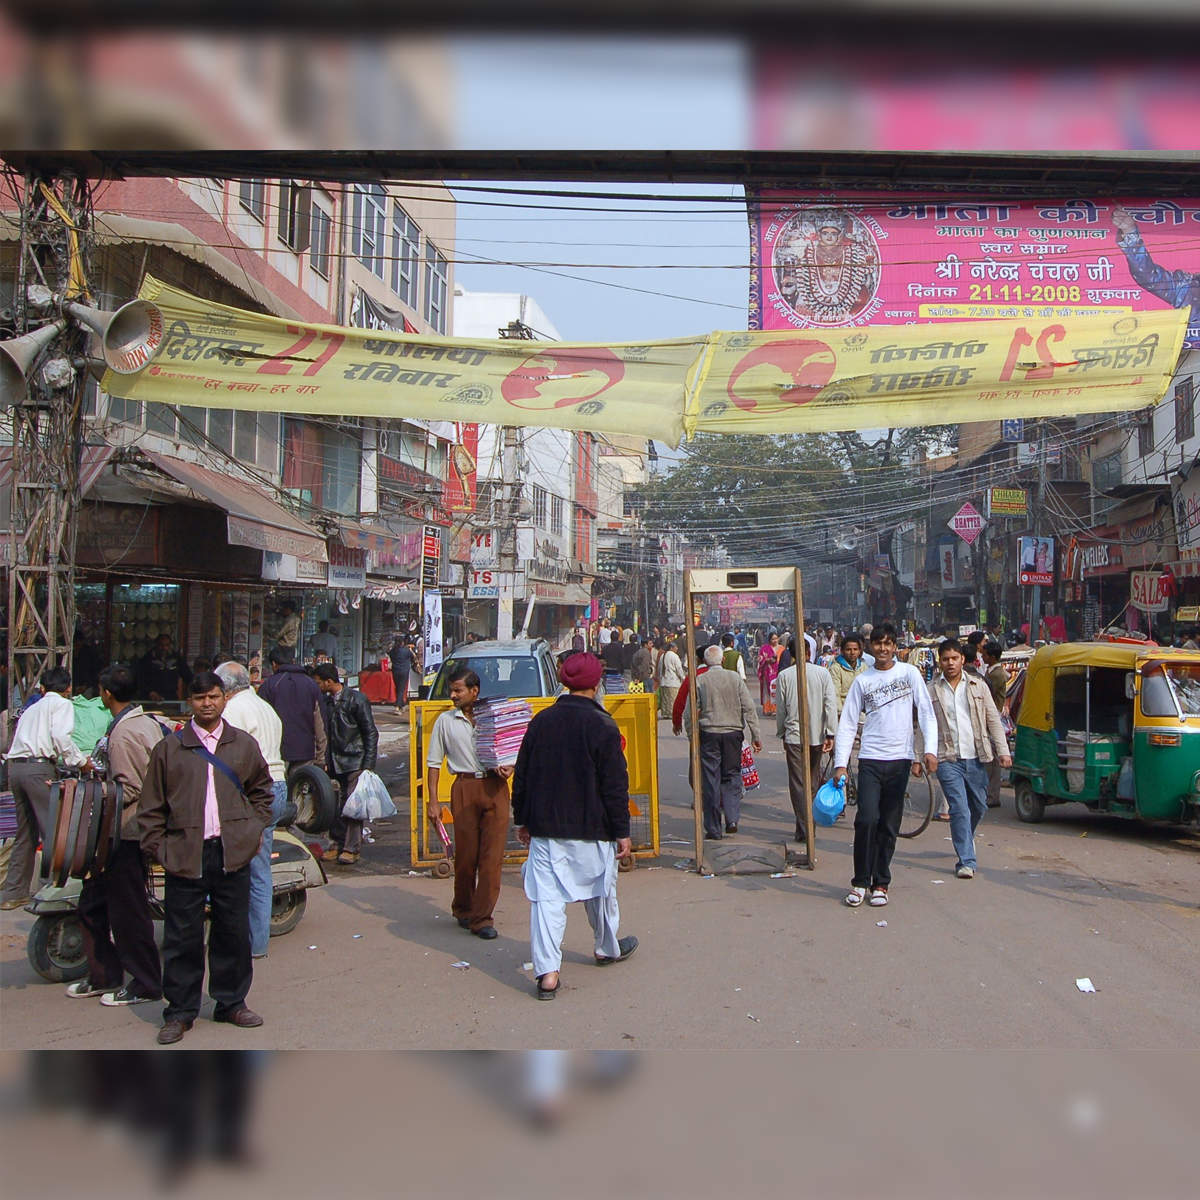 Delhi's Tank Road one of the most notorious markets selling